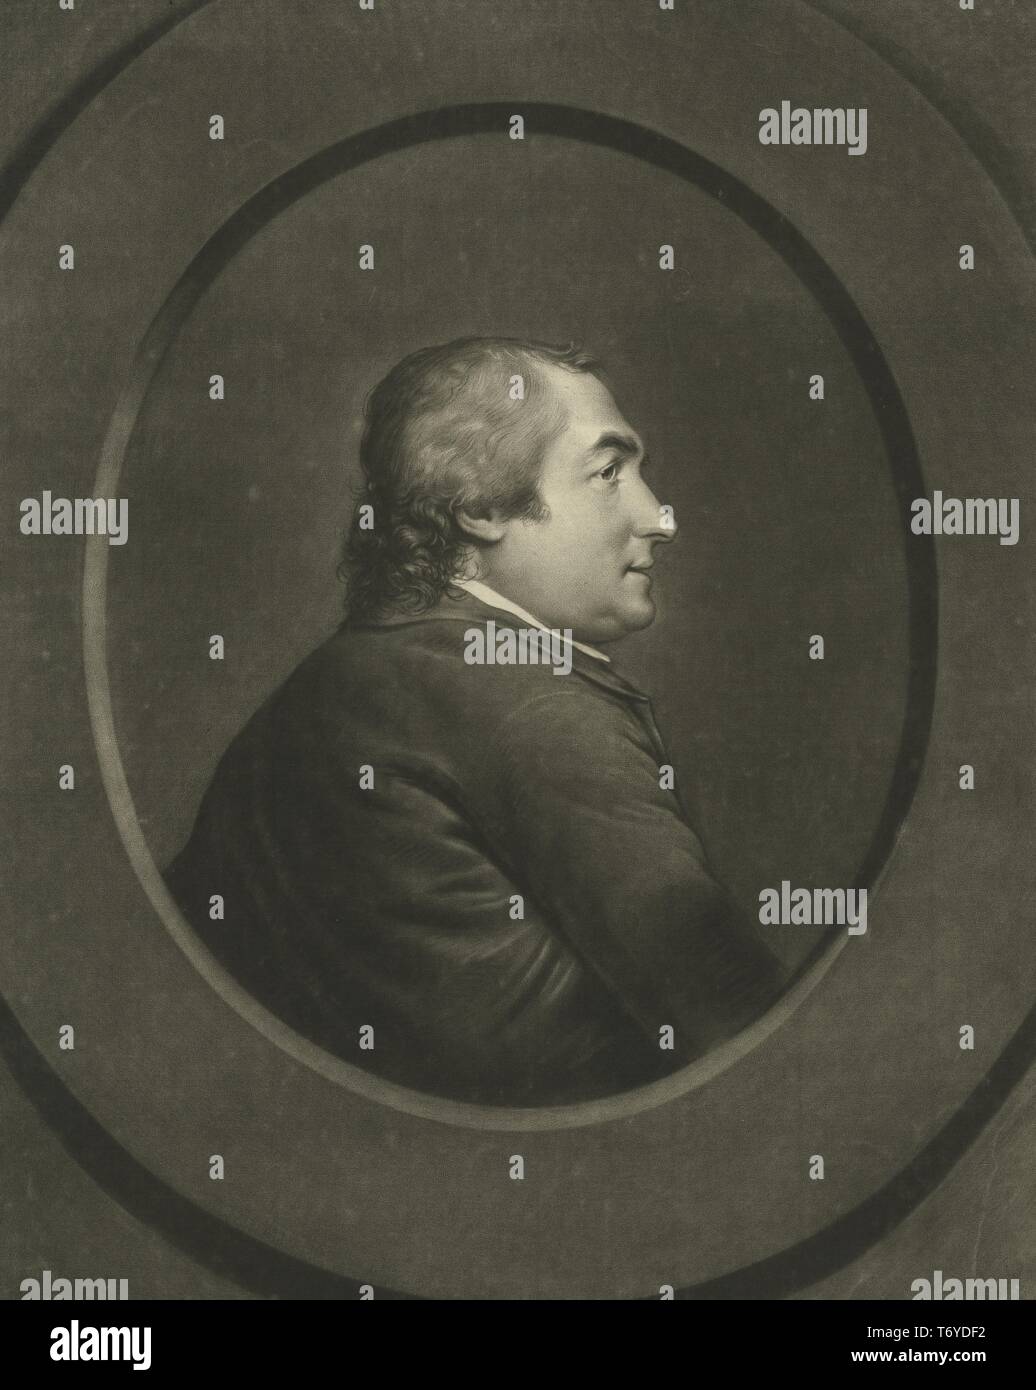 Engraved portrait of Isaac Barre, member of the British Parliament, an Irish soldier, and politician from Dublin, Ireland, 1771. From the New York Public Library. () Stock Photo